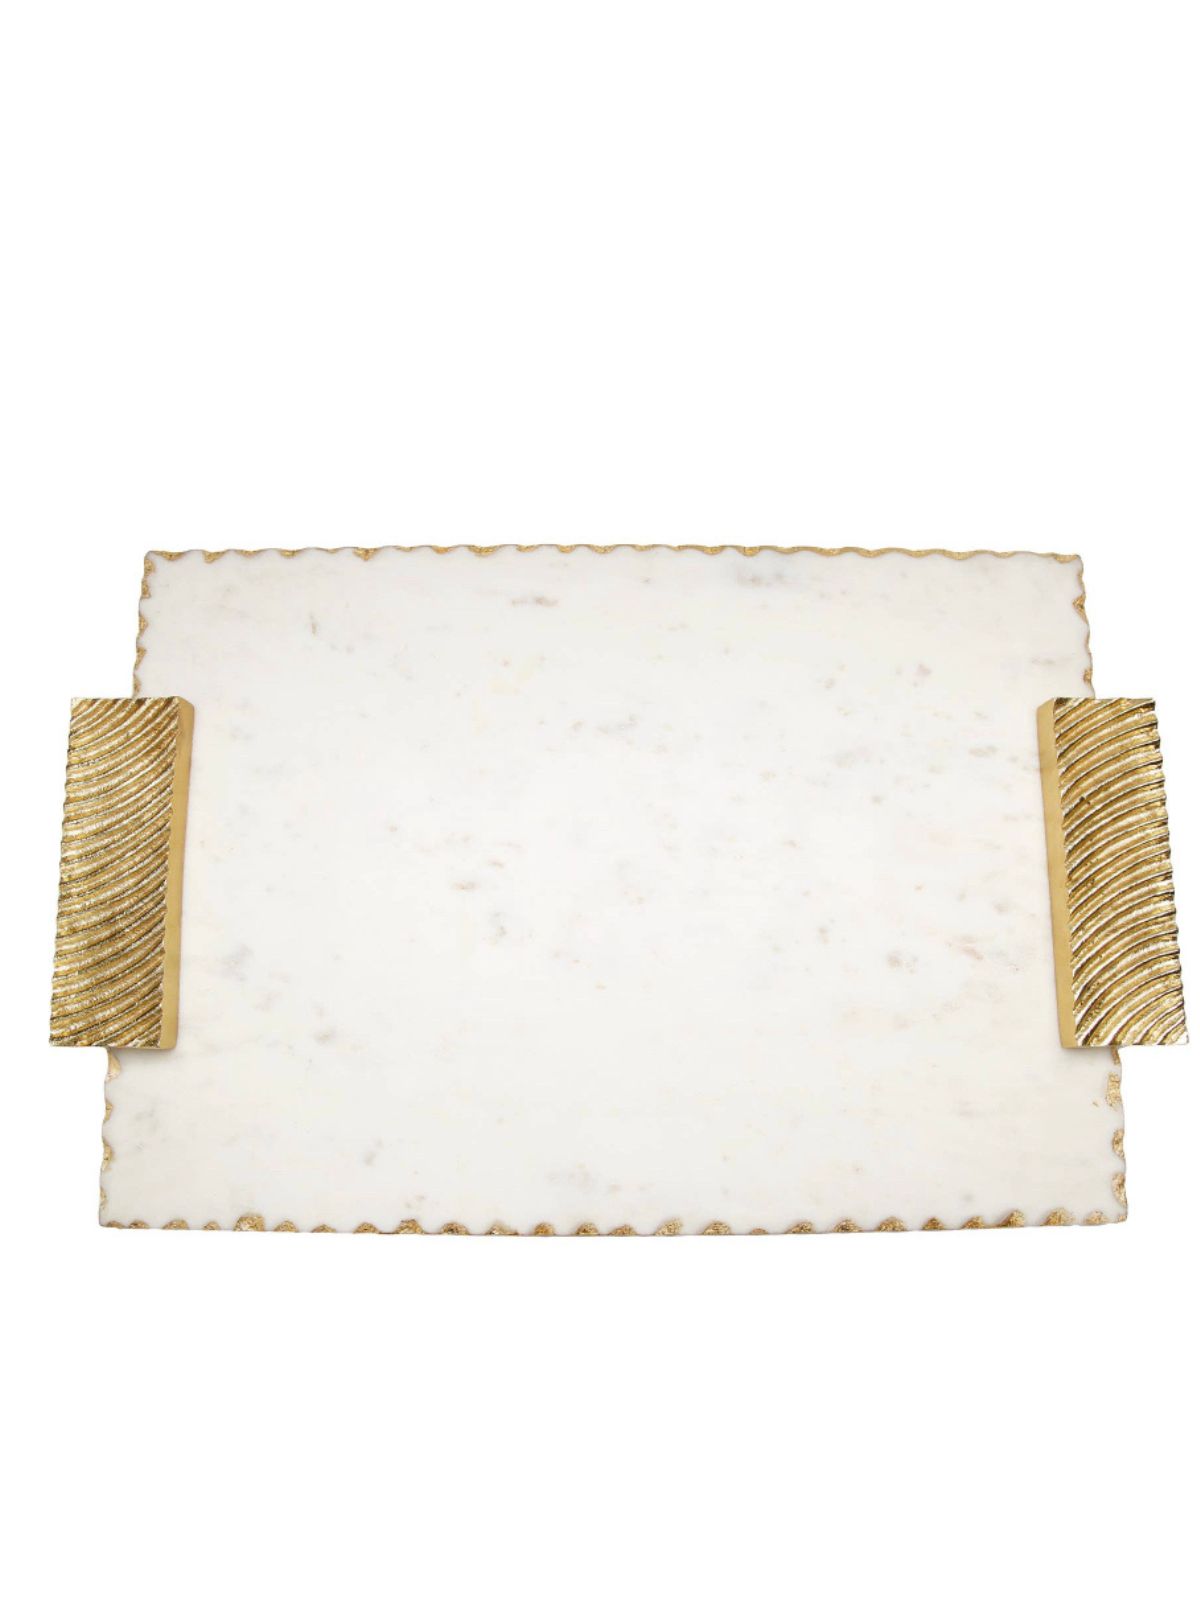 Luxurious White Marble Decorative Tray with Gold Brass Handles Top View, 16L x 11W. 